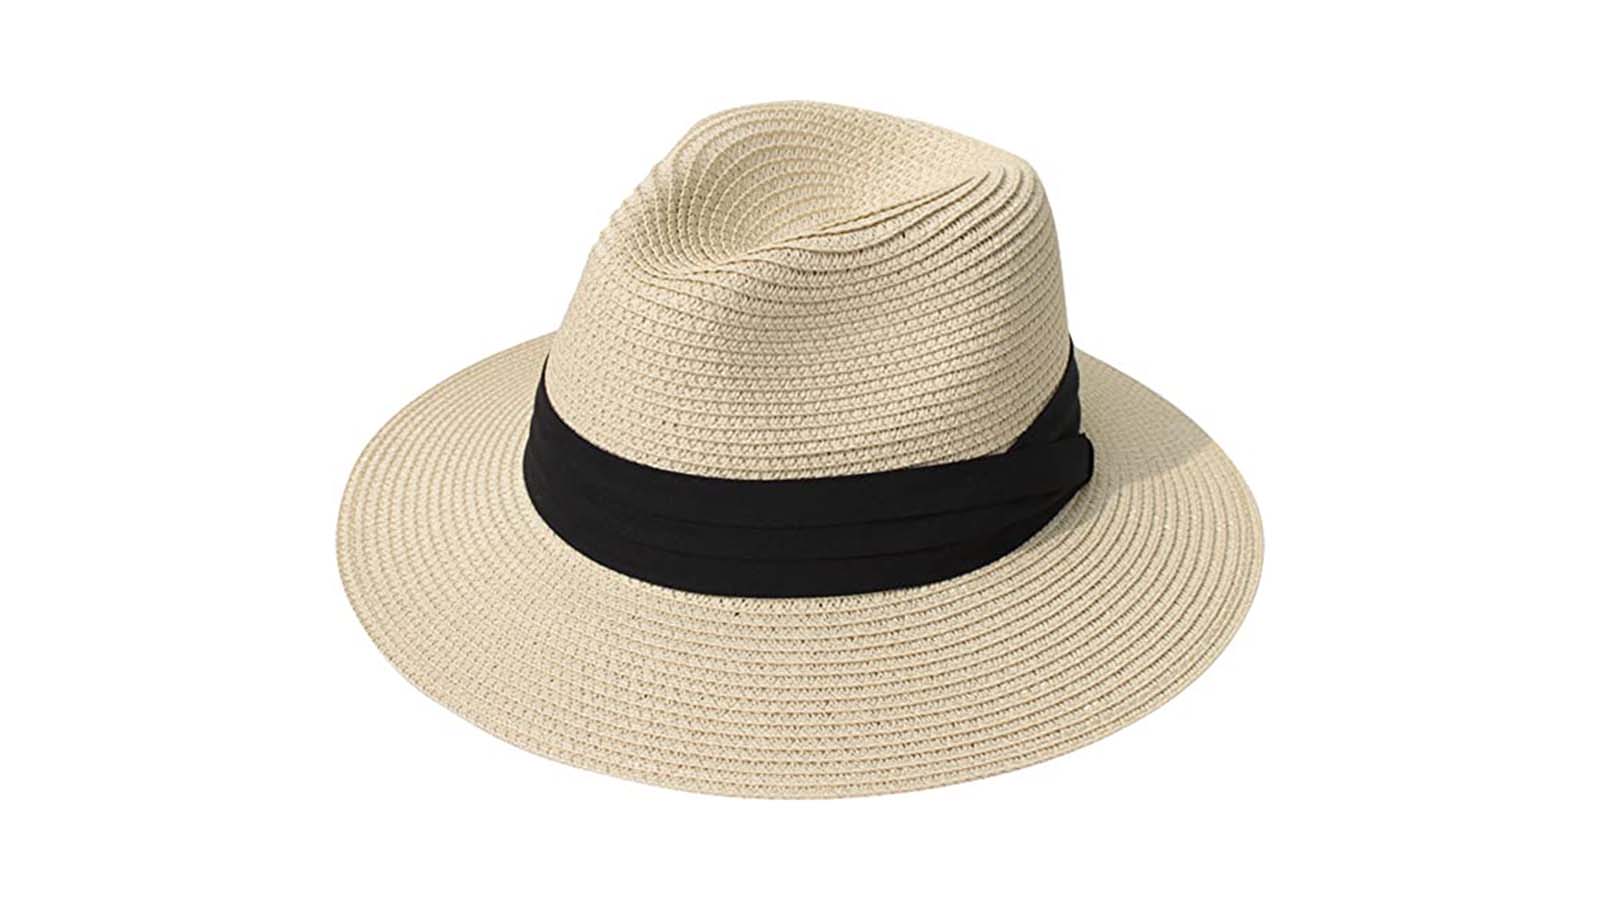 The 15 best packable sun hats of 2023 that won't wrinkle